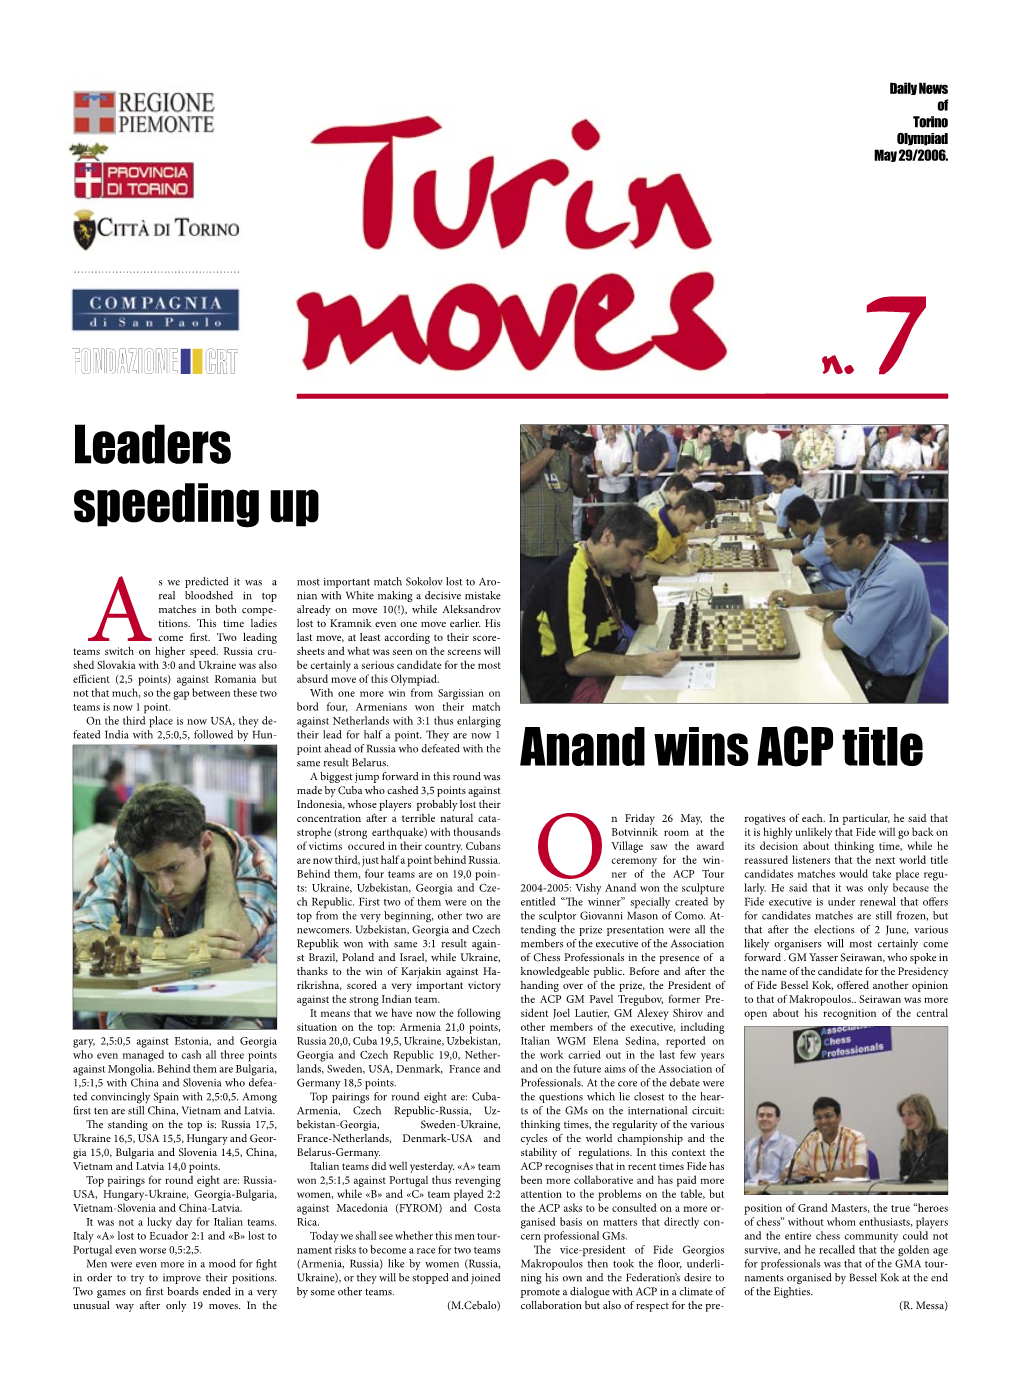 Leaders Speeding up Anand Wins ACP Title